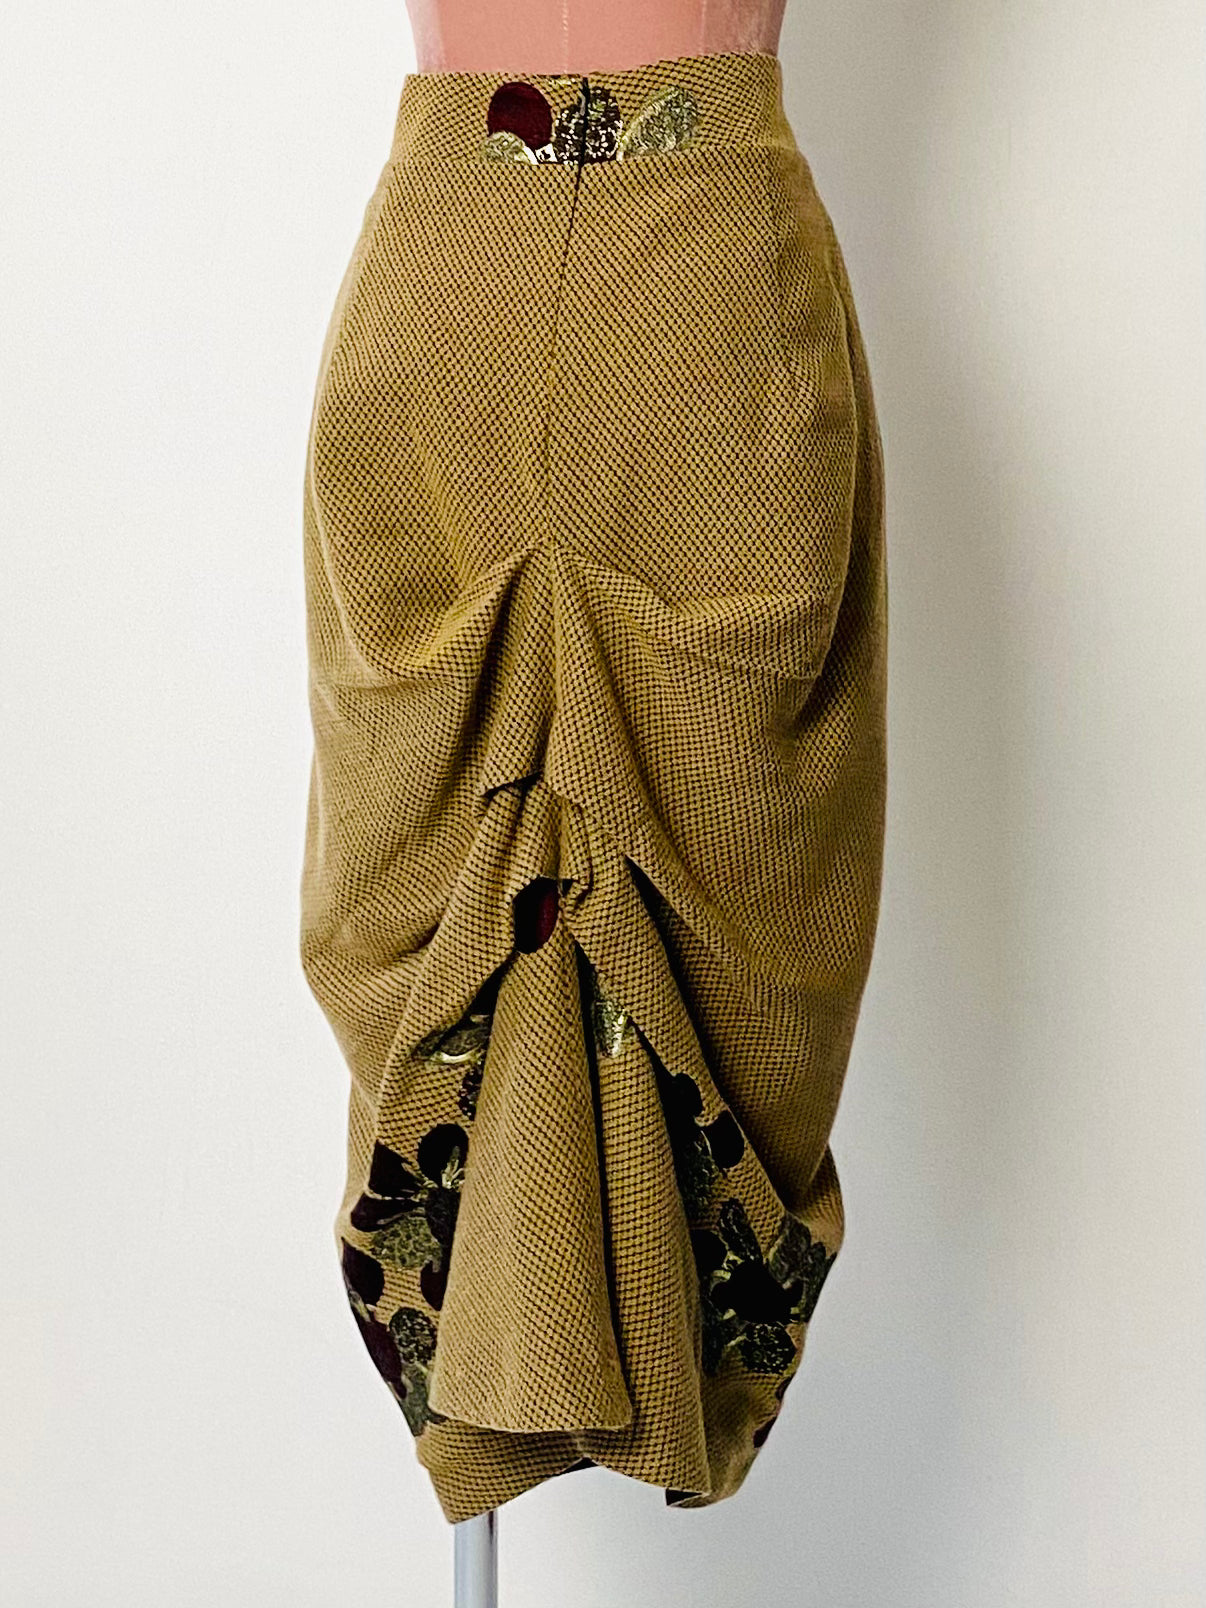 Pencil /tulip style Skirt with back seam Pleats